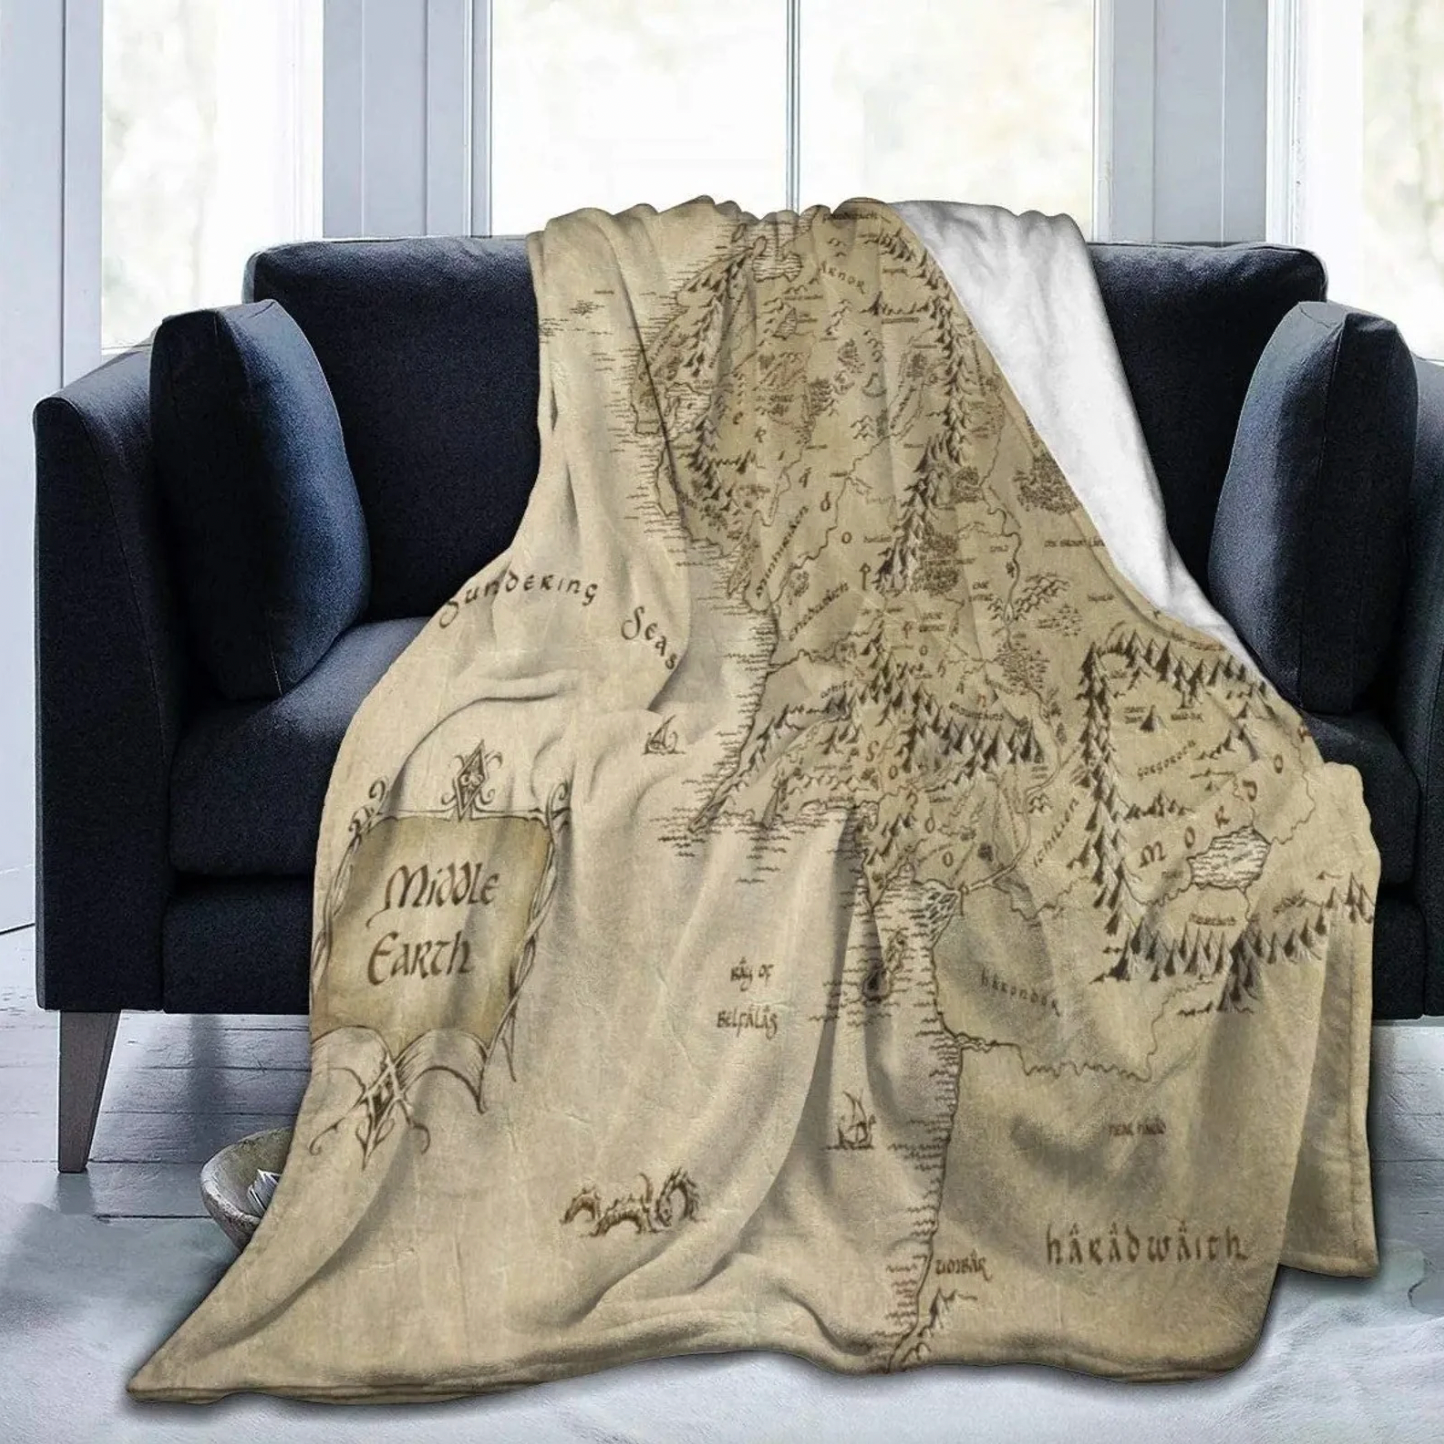 Lord of the Rings Blankets